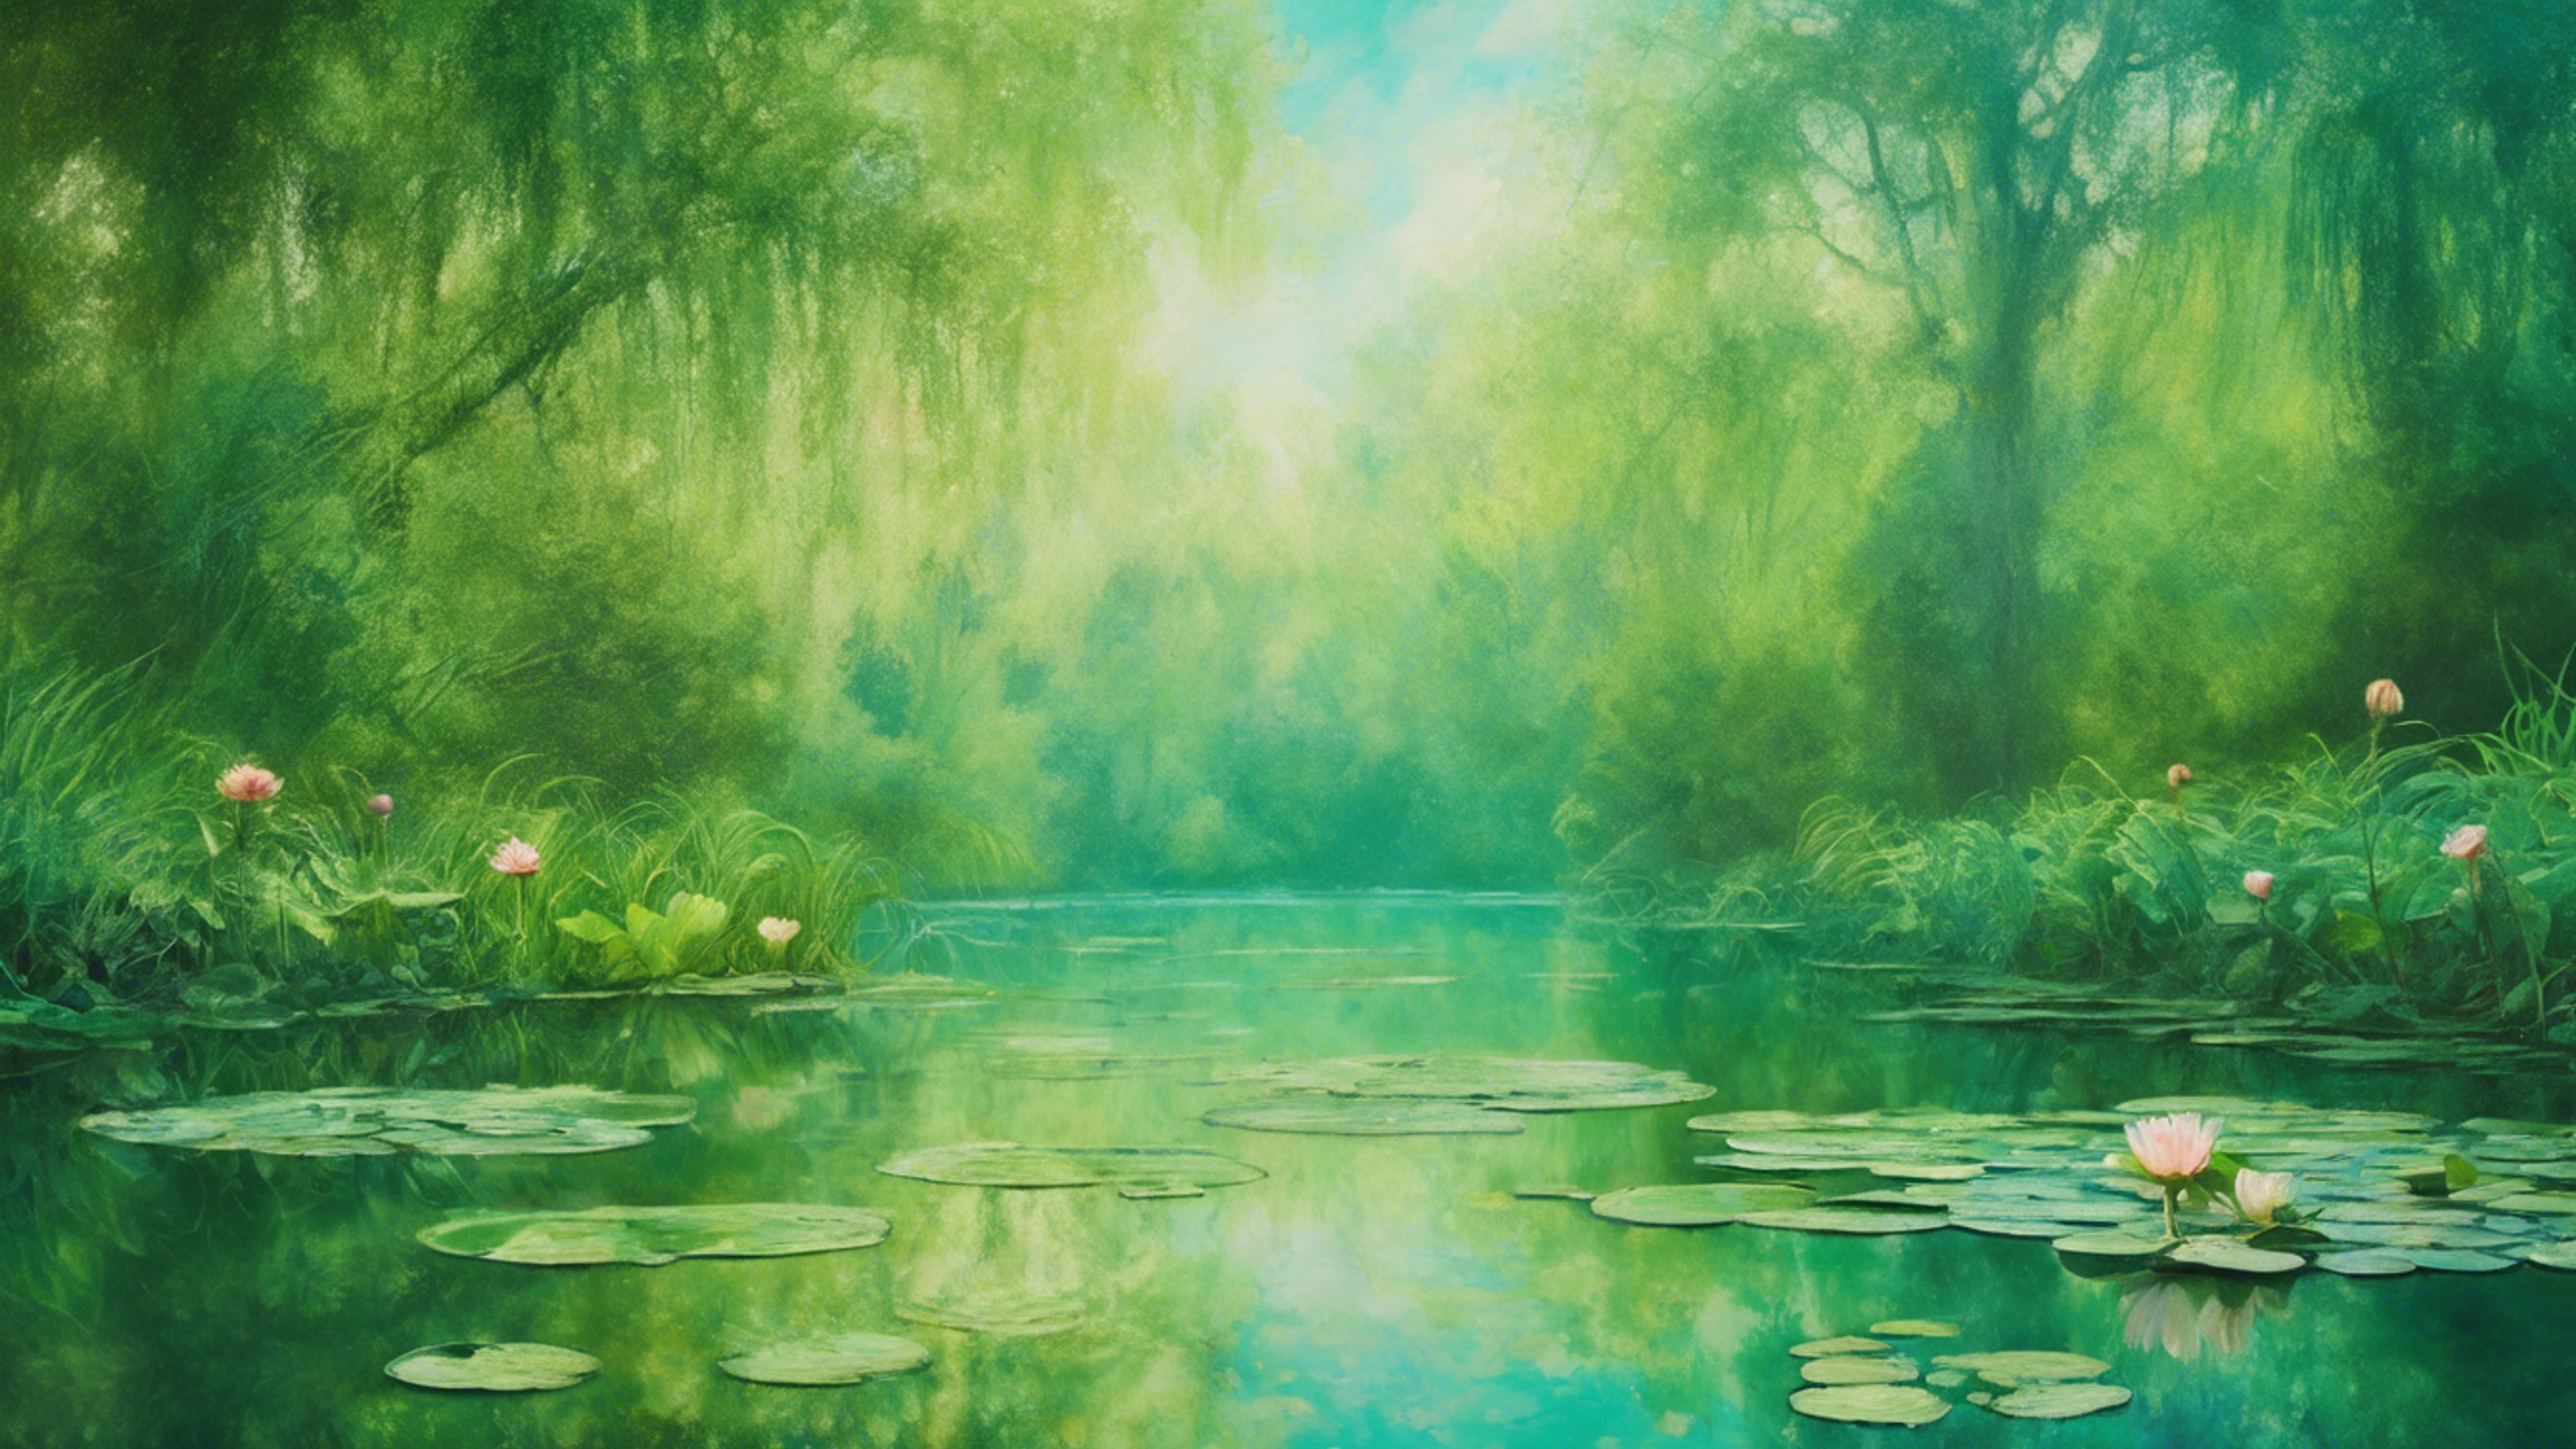 A landscape painting inspired by Monet's Water Lilies, with cool green hues.壁紙[9f0abb477fe746e08ba1]